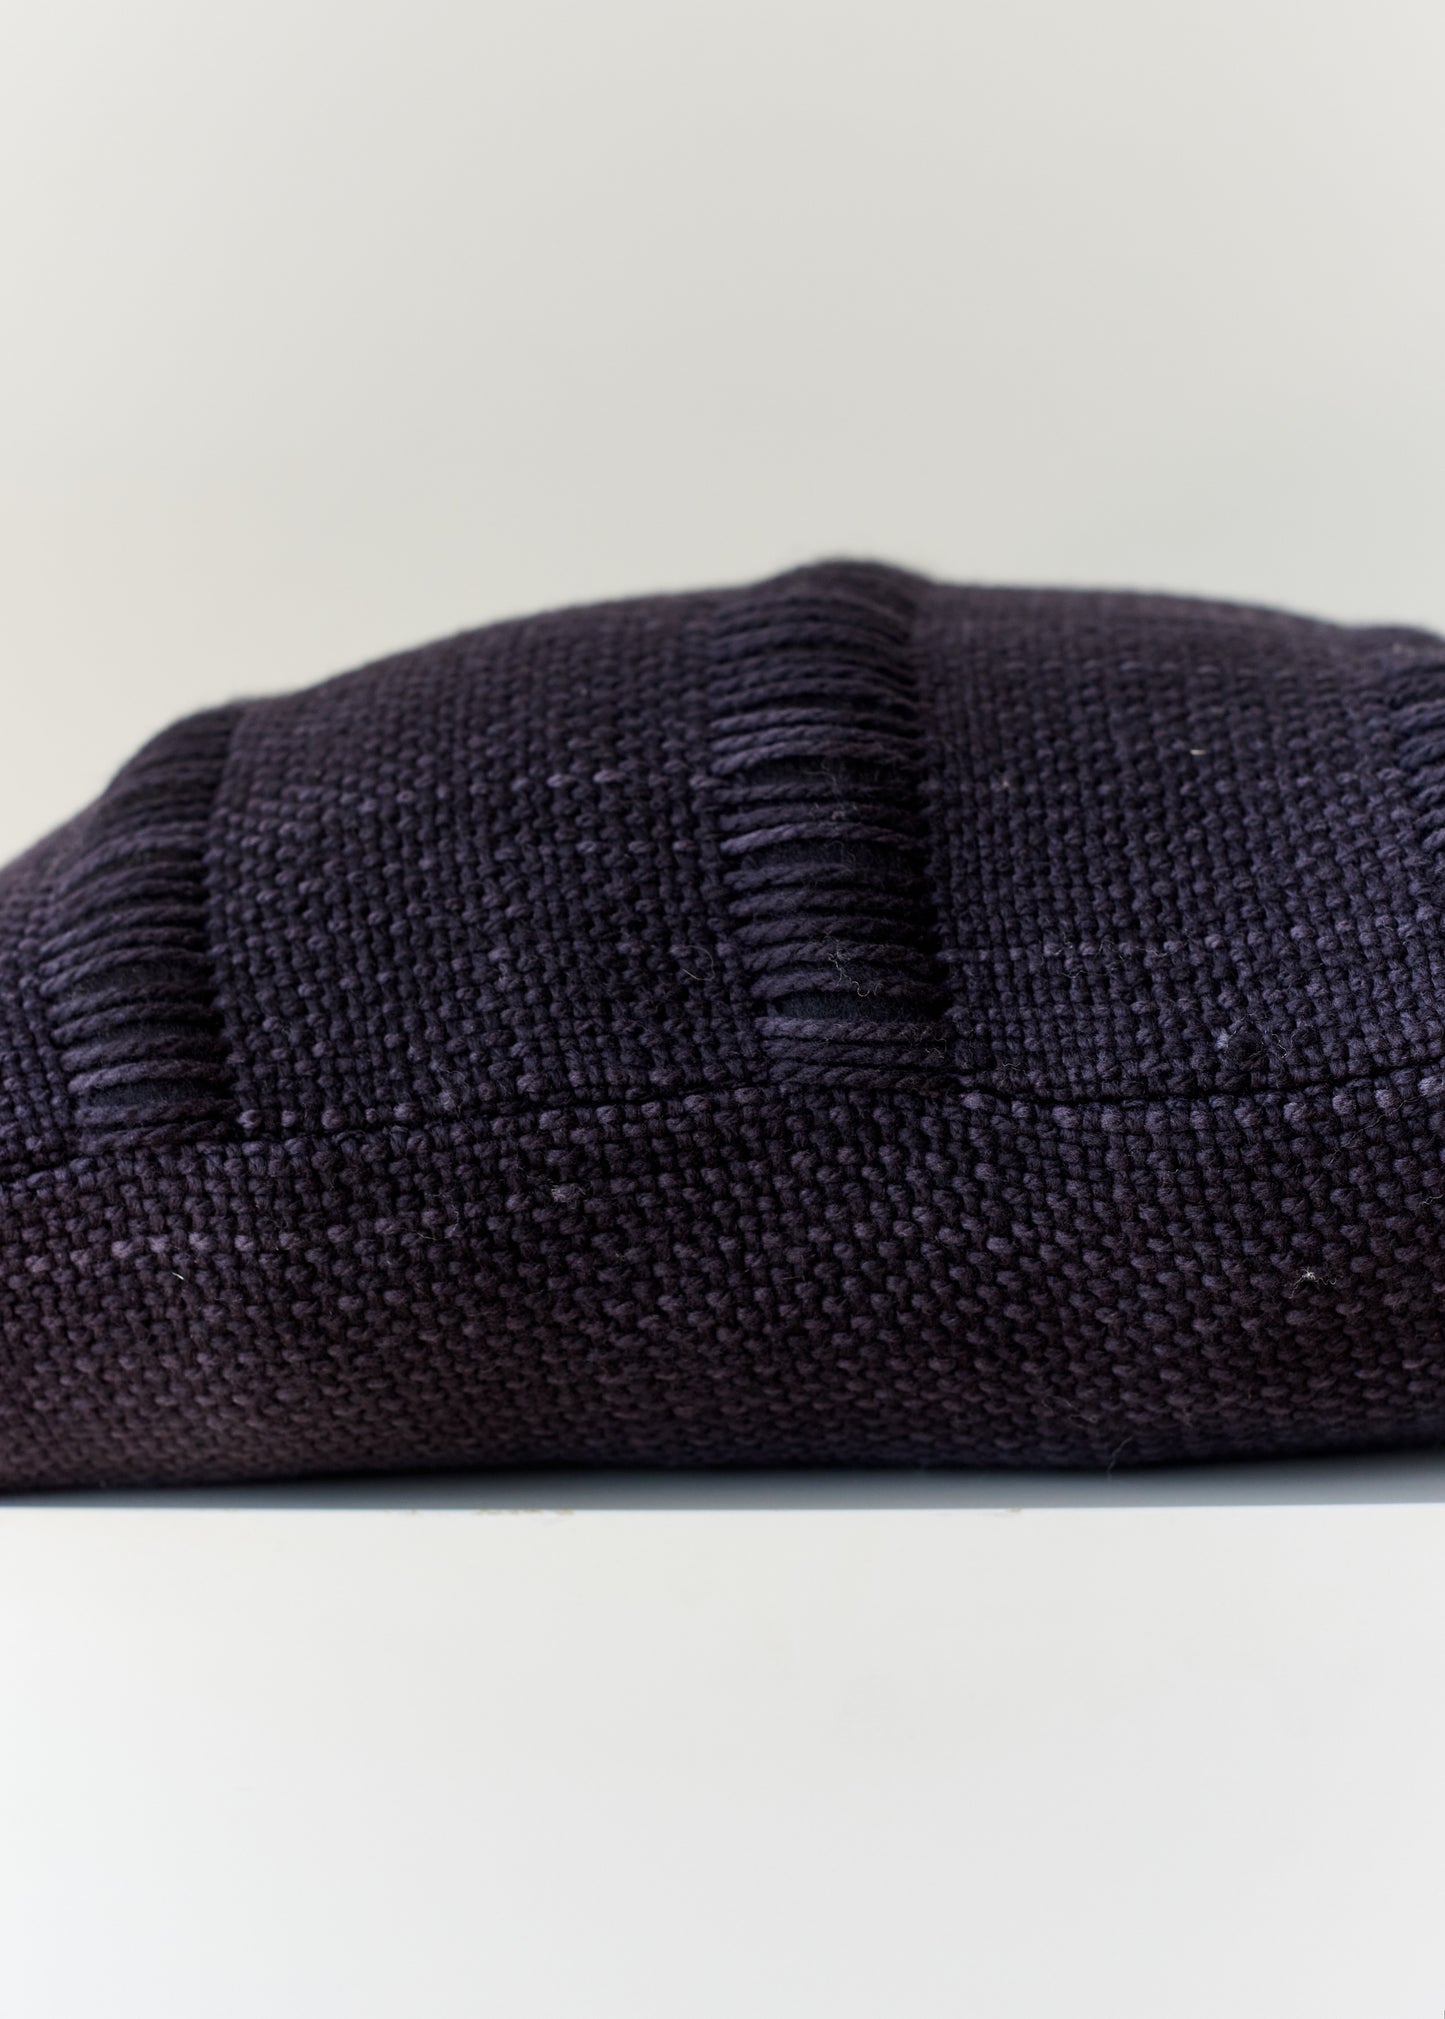 partial horizontal view of a black pillow handwoven